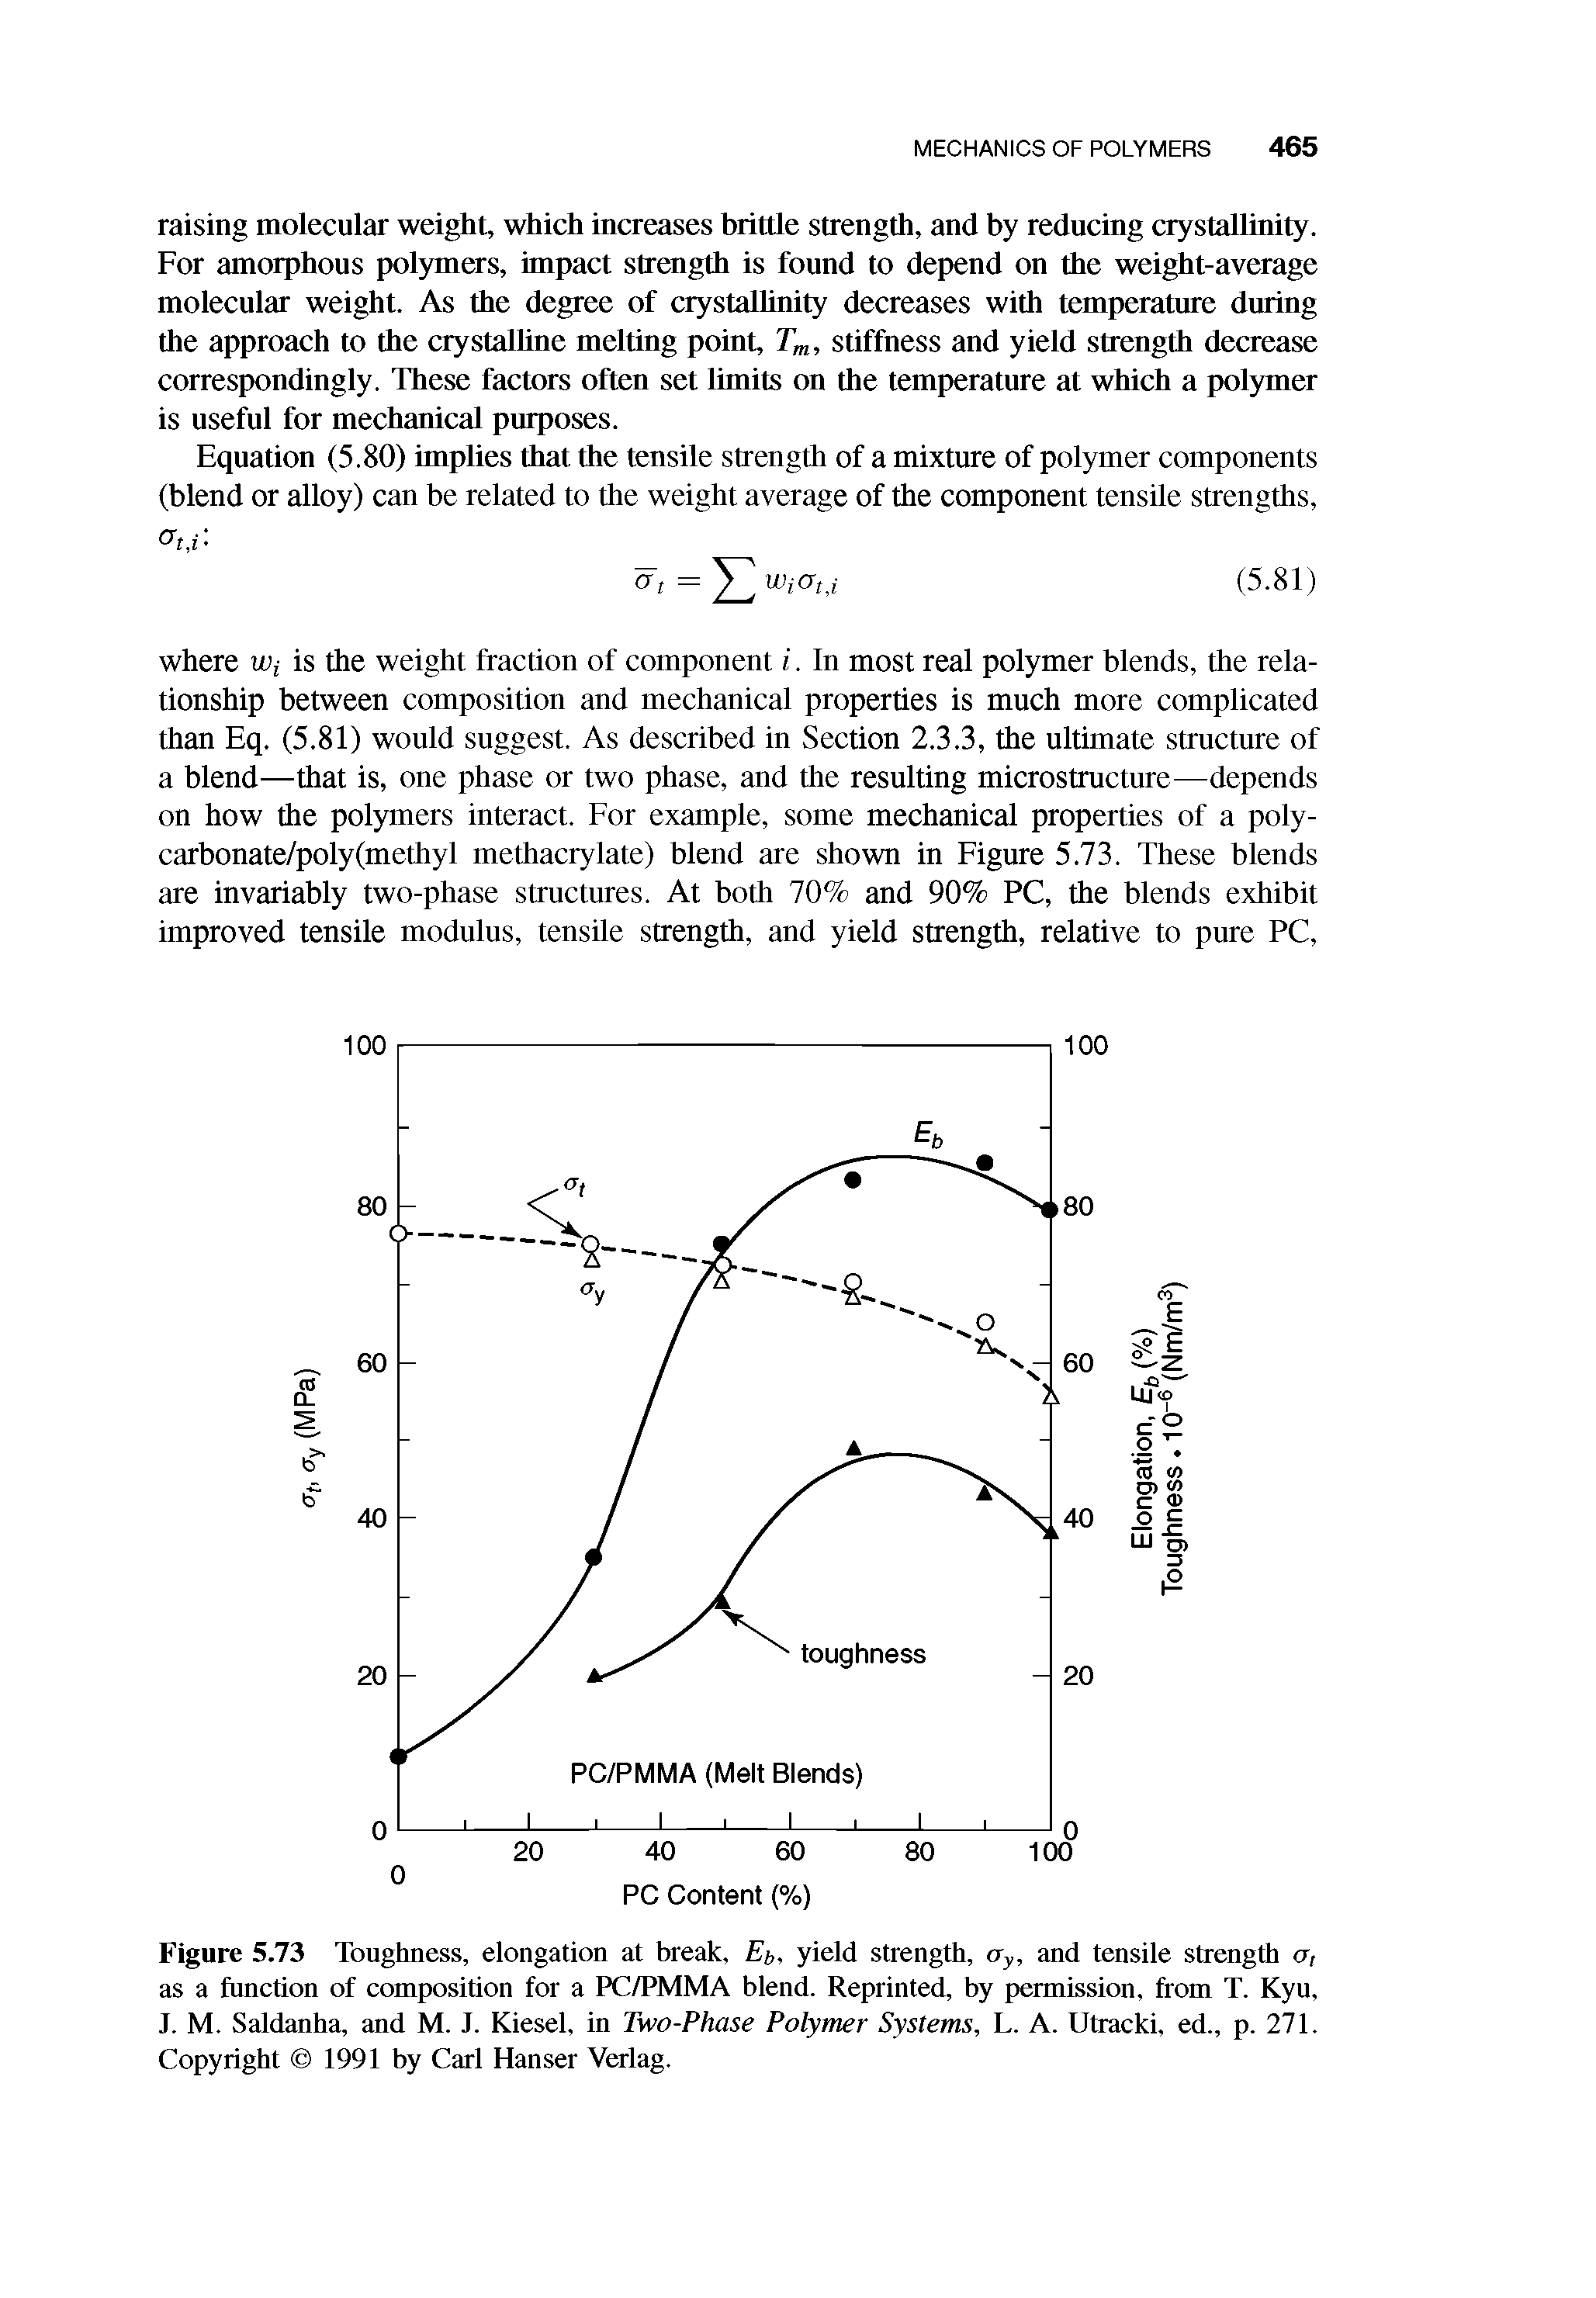 Figure 5.73 Toughness, elongation at break, Et, yield strength, ay, and tensile strength cr, as a function of composition for a PC/PMMA blend. Reprinted, by permission, from T. Kyu, J. M. Saldanha, and M. J. Kiesel, in Two-Phase Polymer Systems, L. A. Utracki, ed., p. 271. Copyright 1991 by Carl Hanser Verlag.